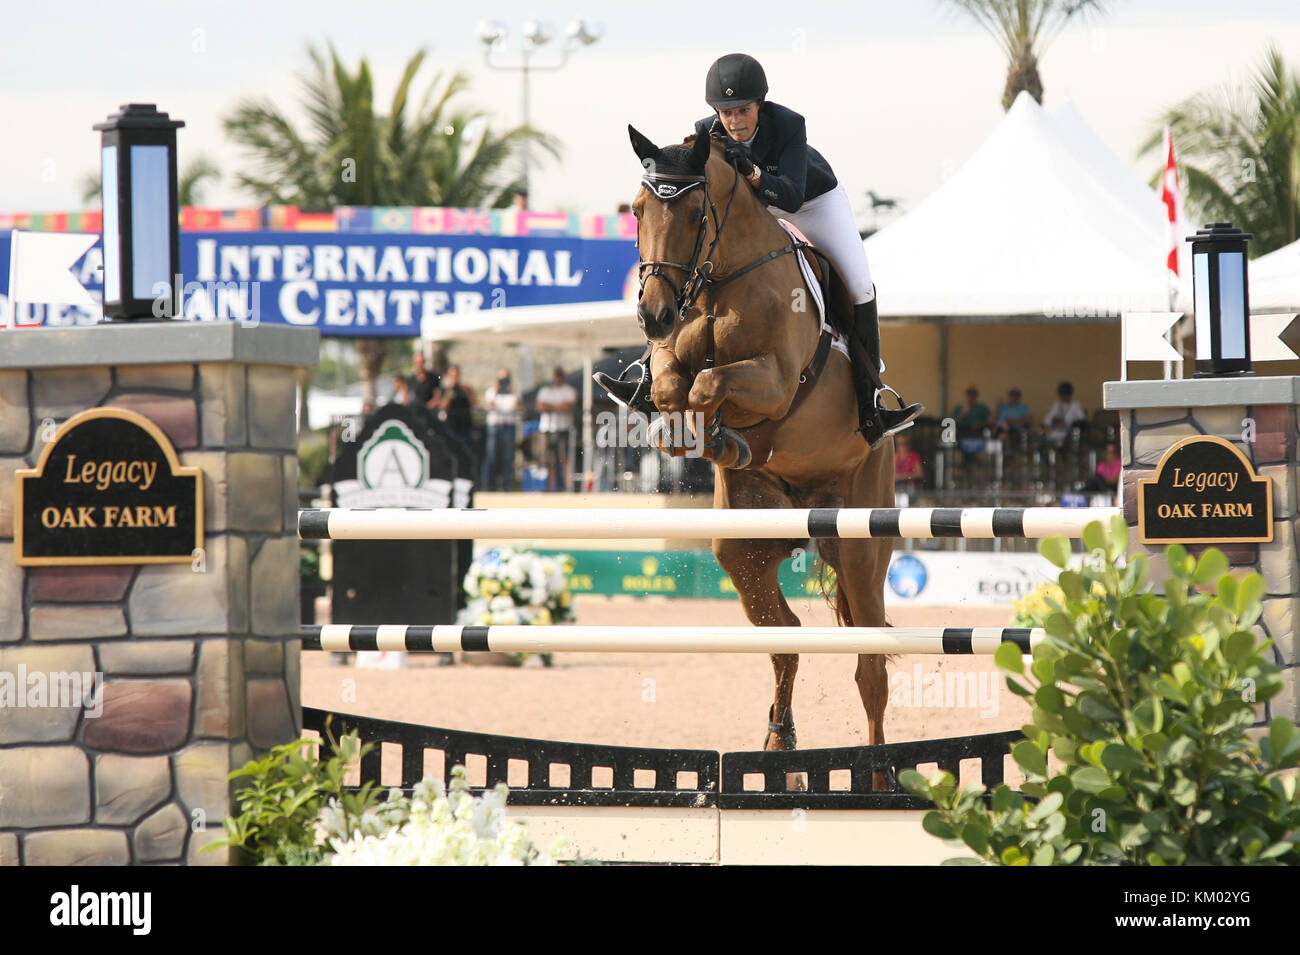 WELLINGTON, FL - JANUARY 26: Athina Onassis Roussel l participtaes in  the FTI Winter Equestrian Festival at the Palm Beach International Equestrian Center on January 26, 2014 in Wellington, Florida   People:  Athina Onassis Roussel Stock Photo